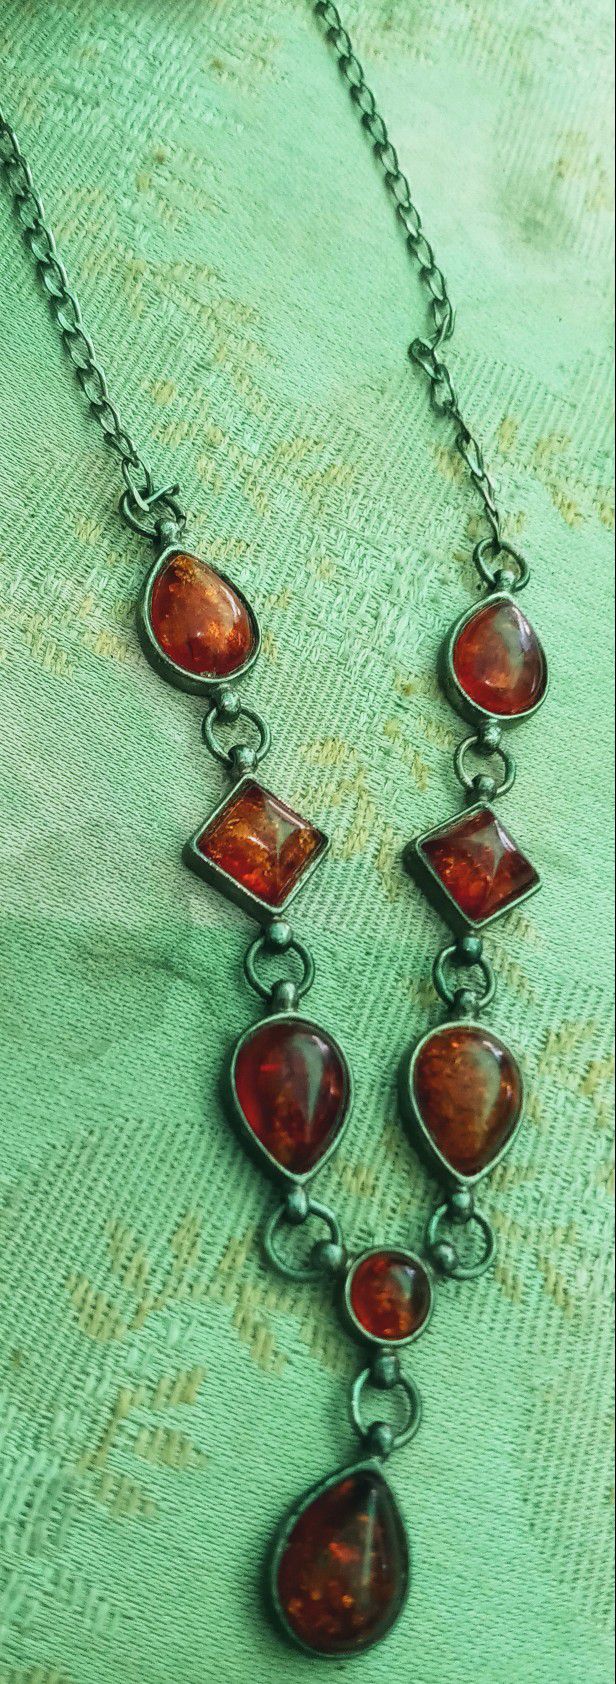 Antique Amber Necklace With Ring